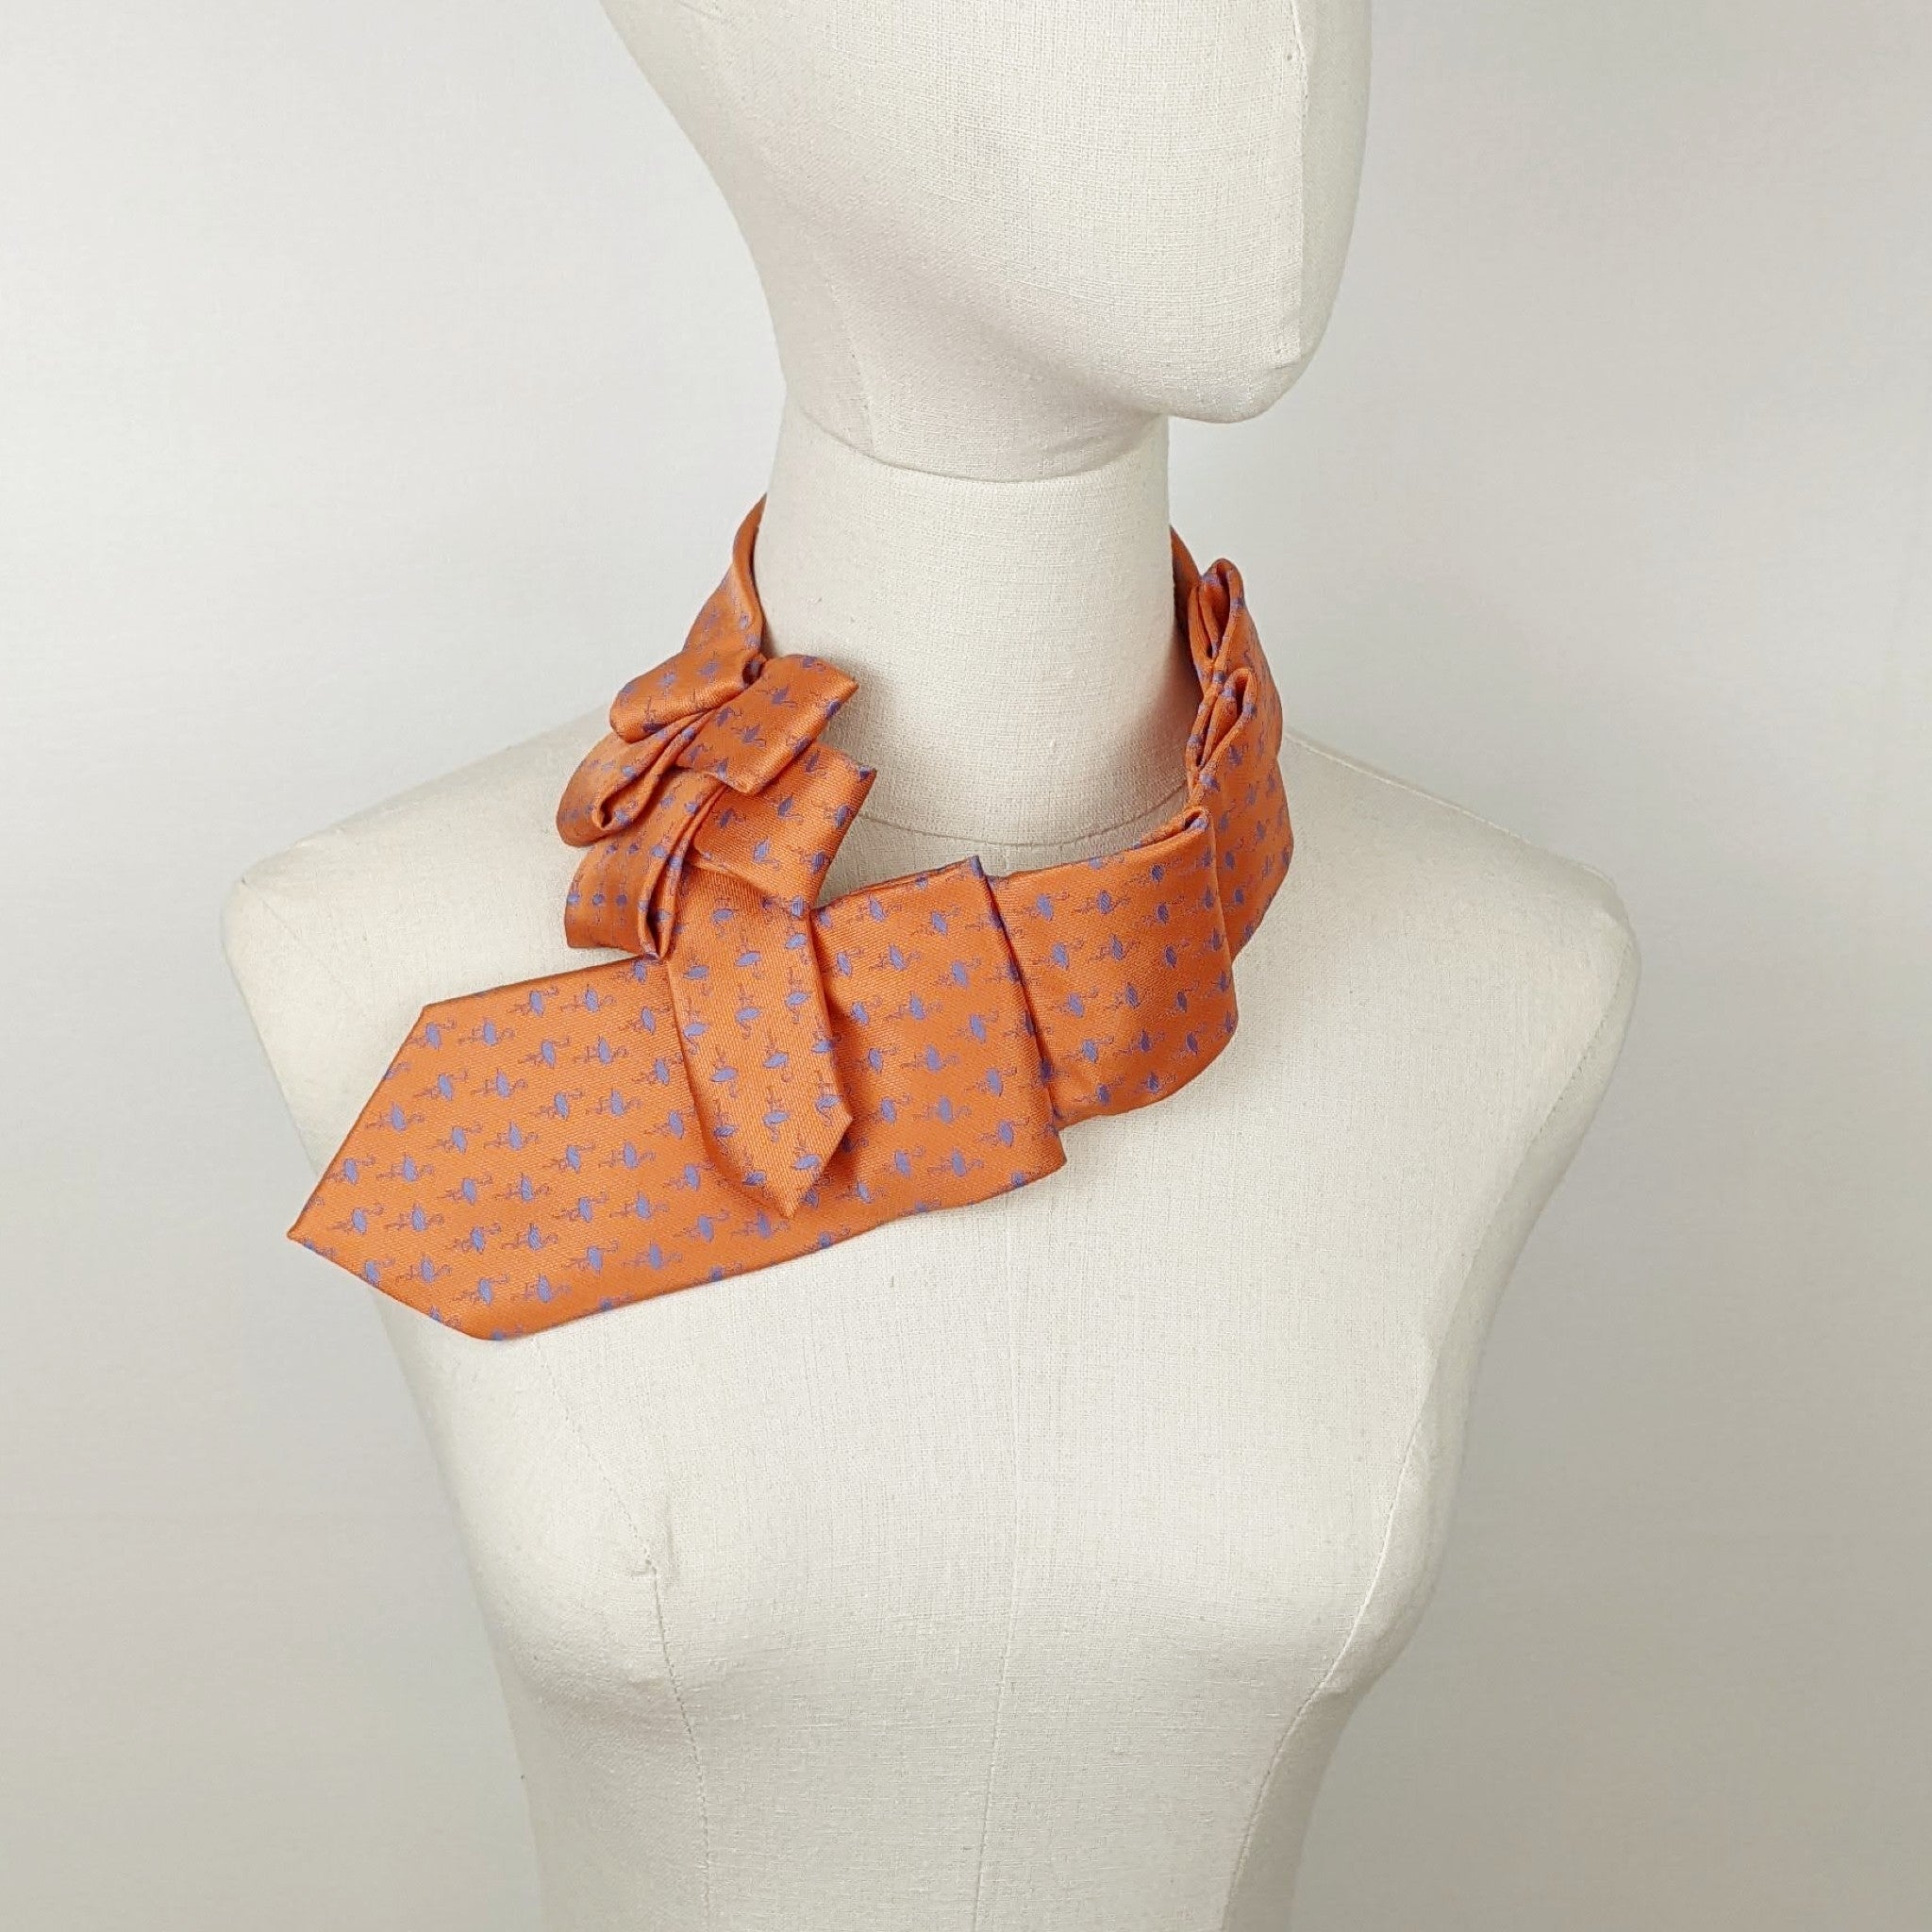 Scarf In Orange With A Blue Flamingo Print.